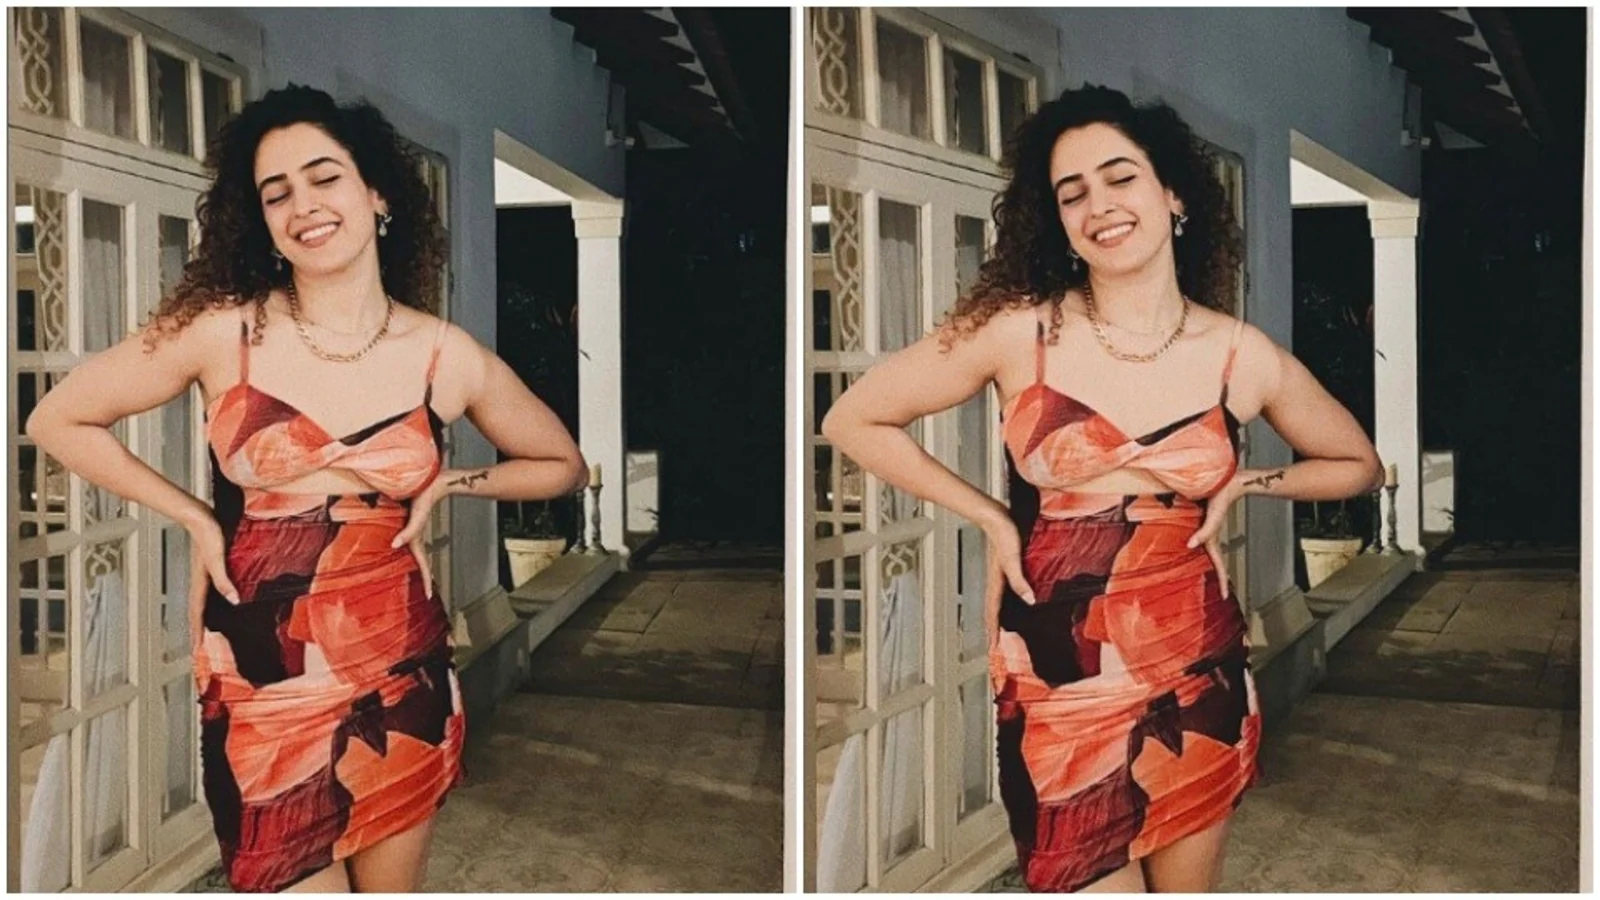 Sanya Malhotra’s dumbbell workout is all the fitness inspo we need